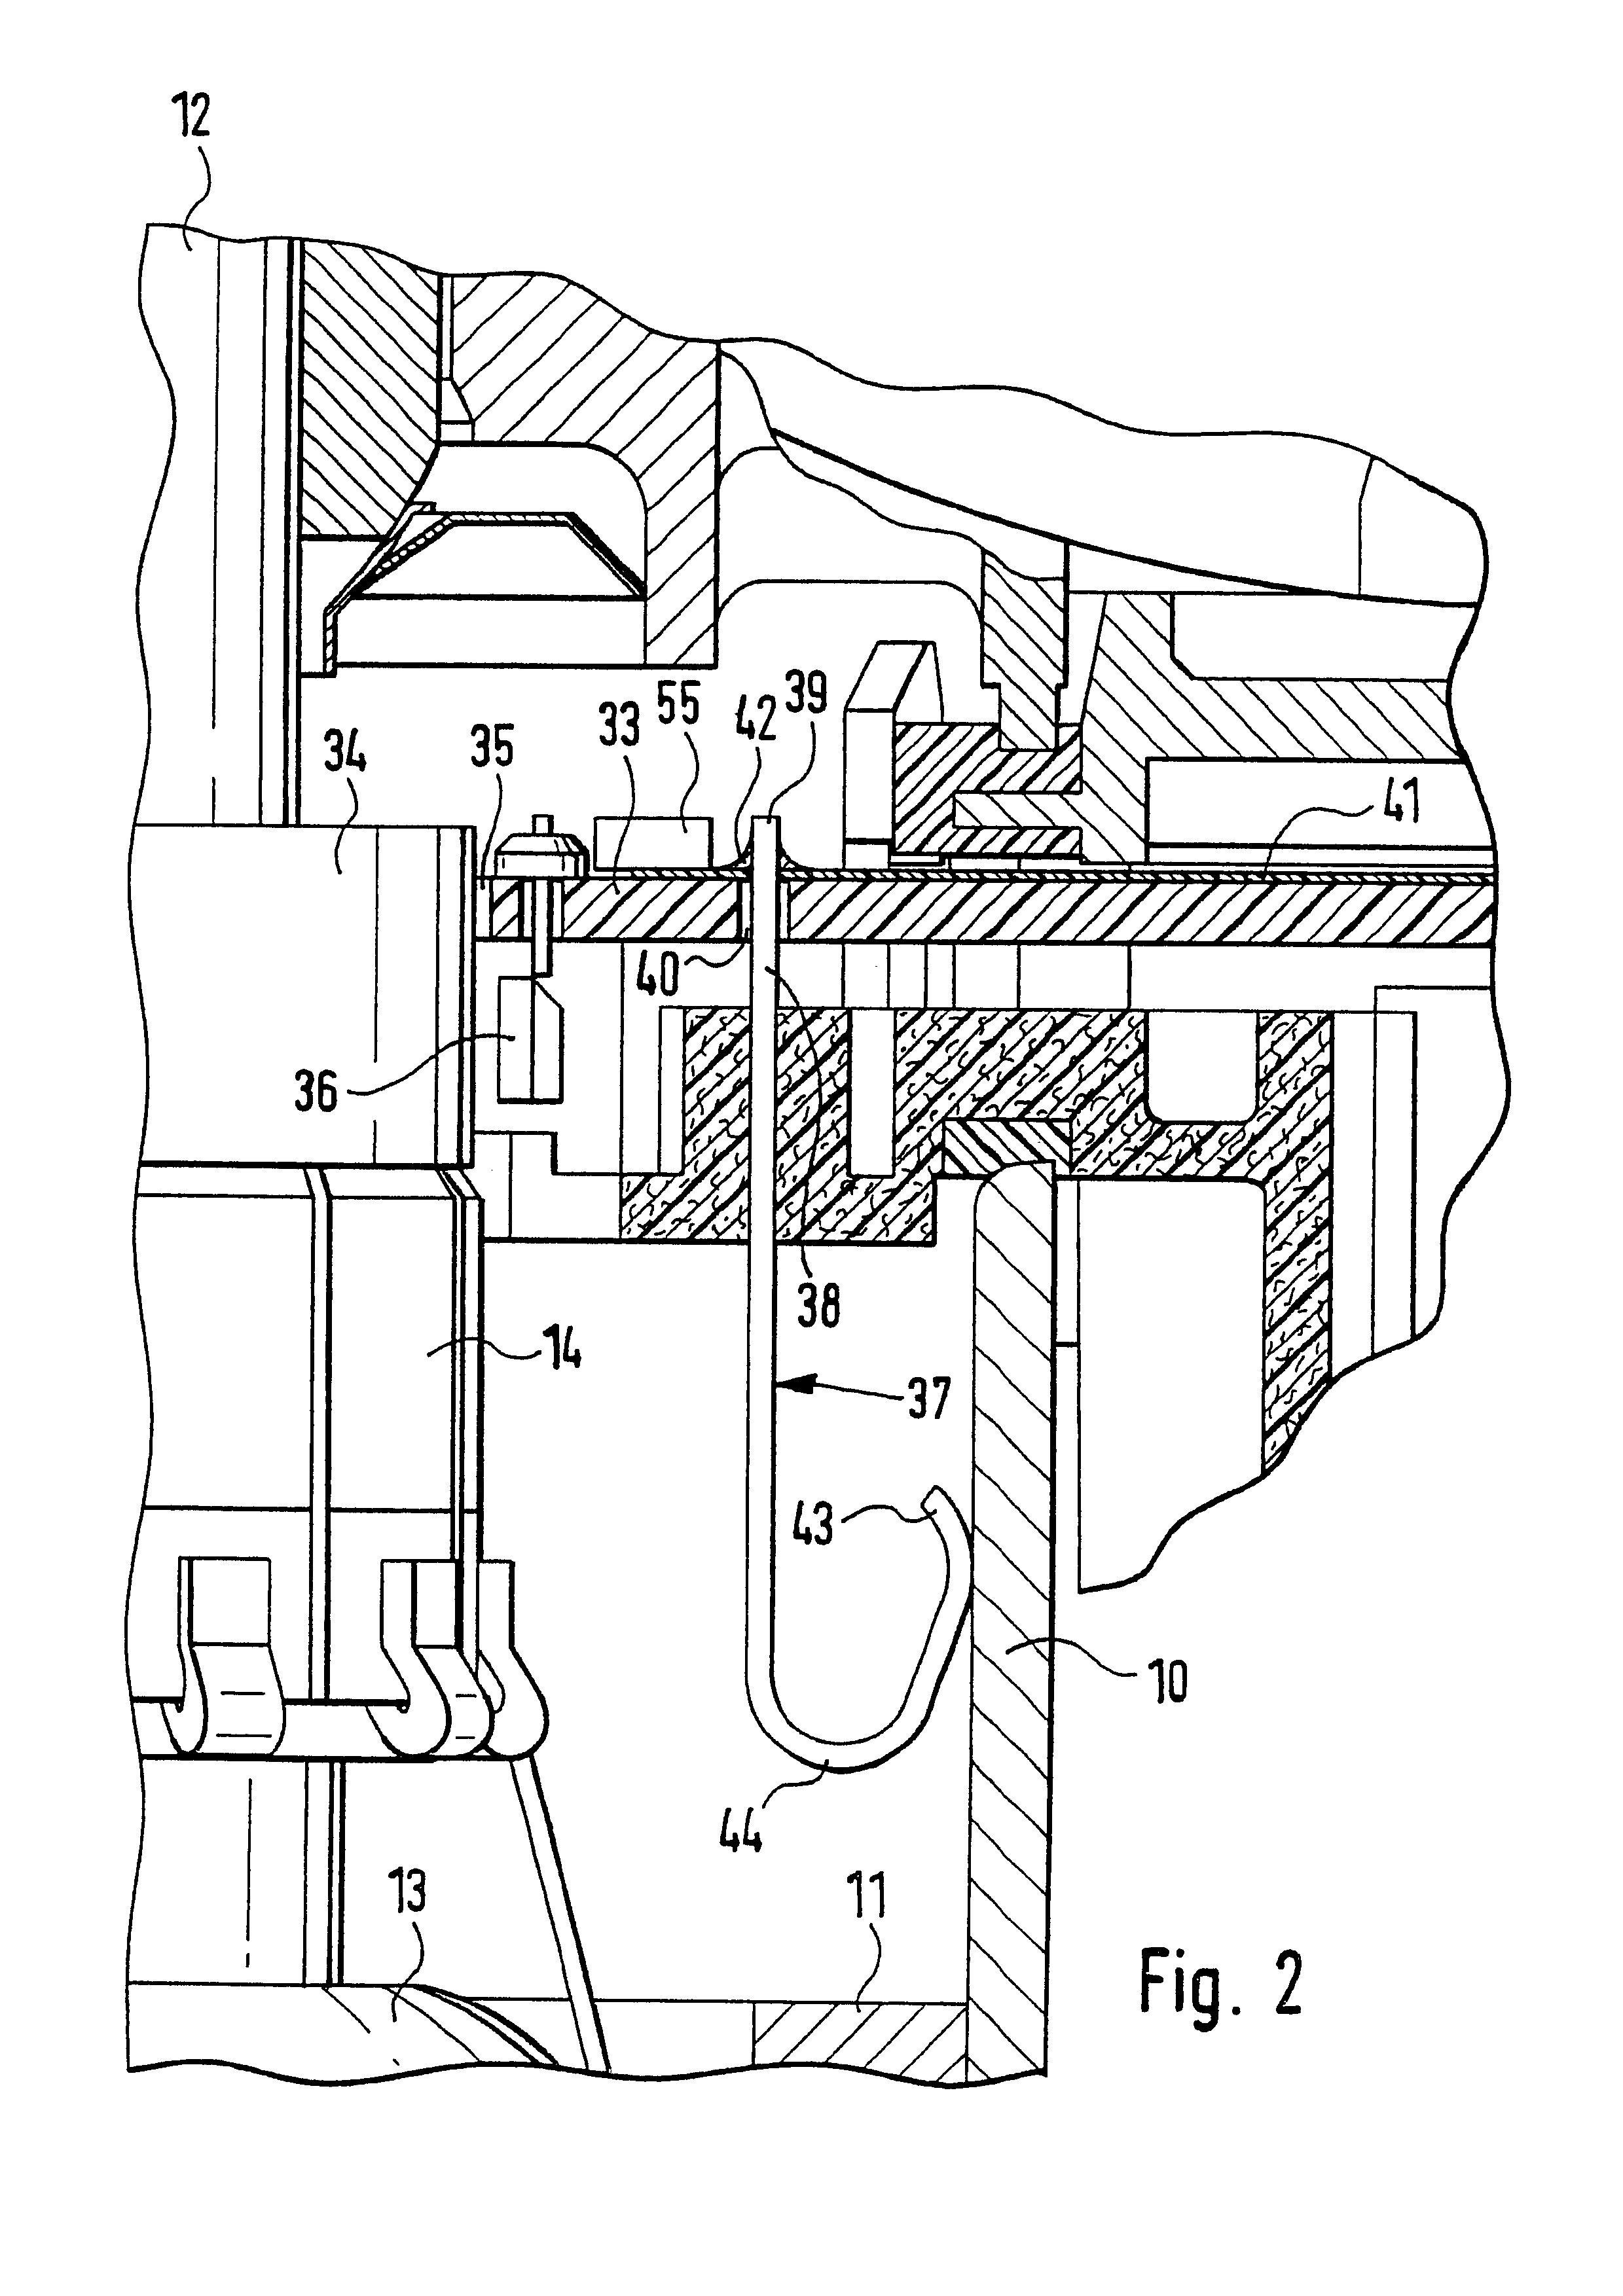 Actuating drive with an electric motor and control electronics